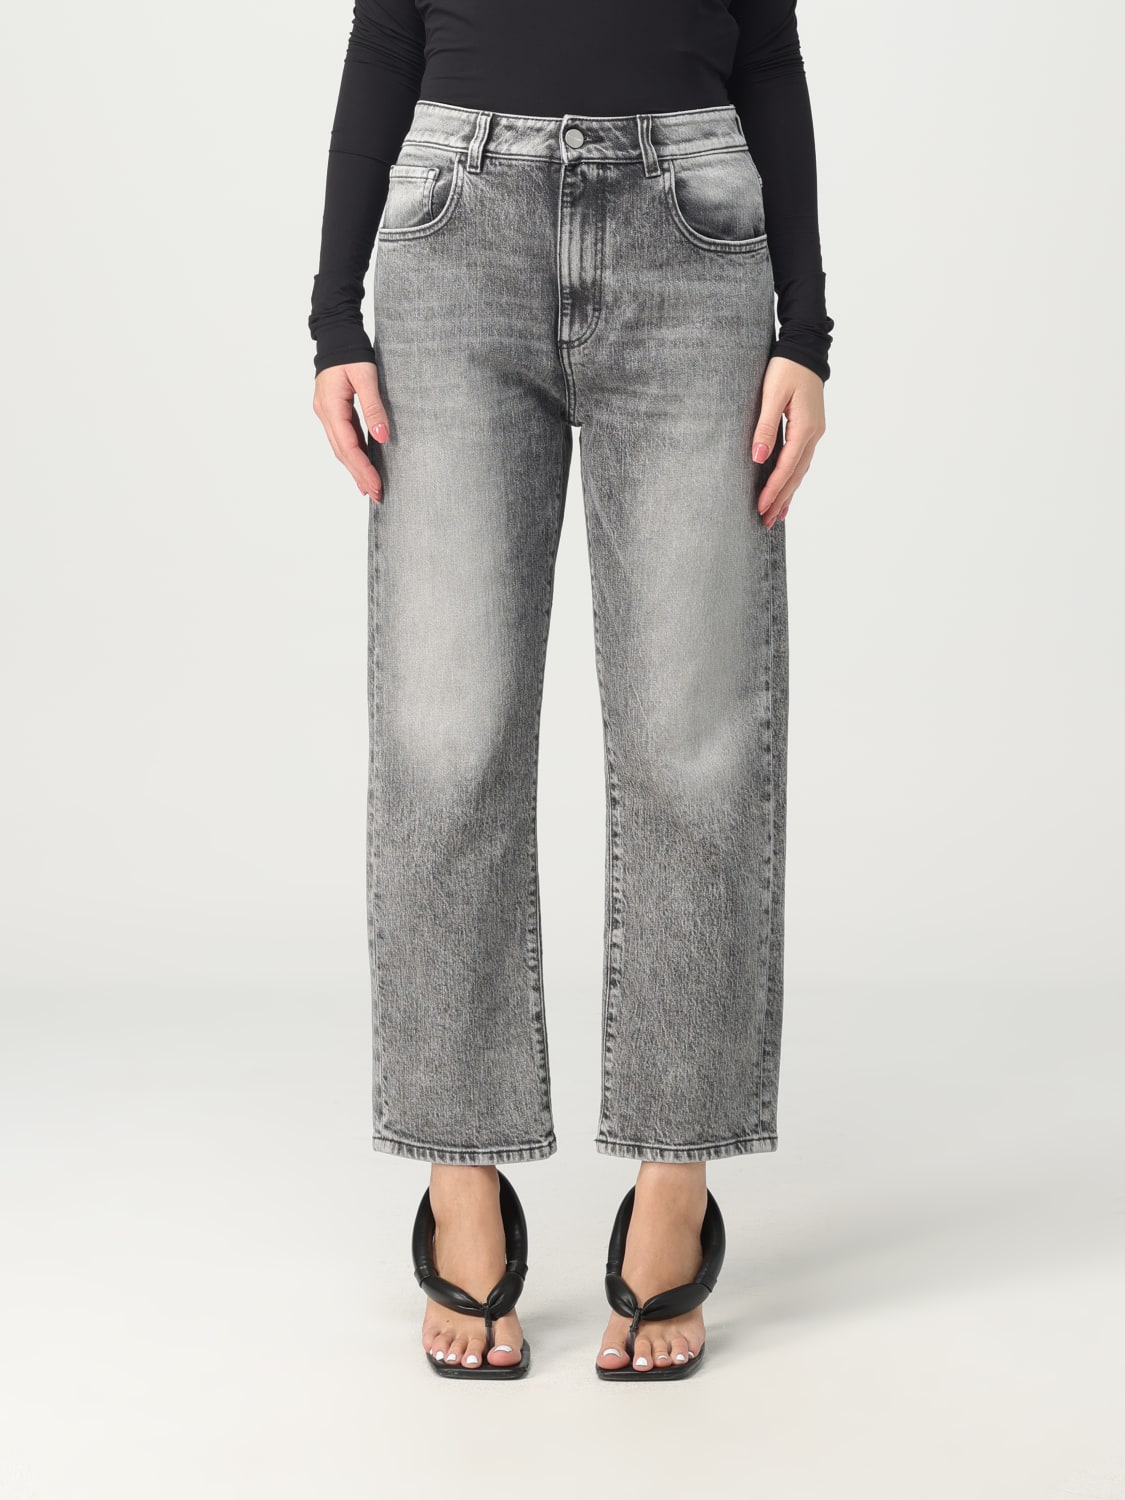 ICON DENIM LOS ANGELES: jeans for woman - Grey | Icon Denim Los Angeles ...